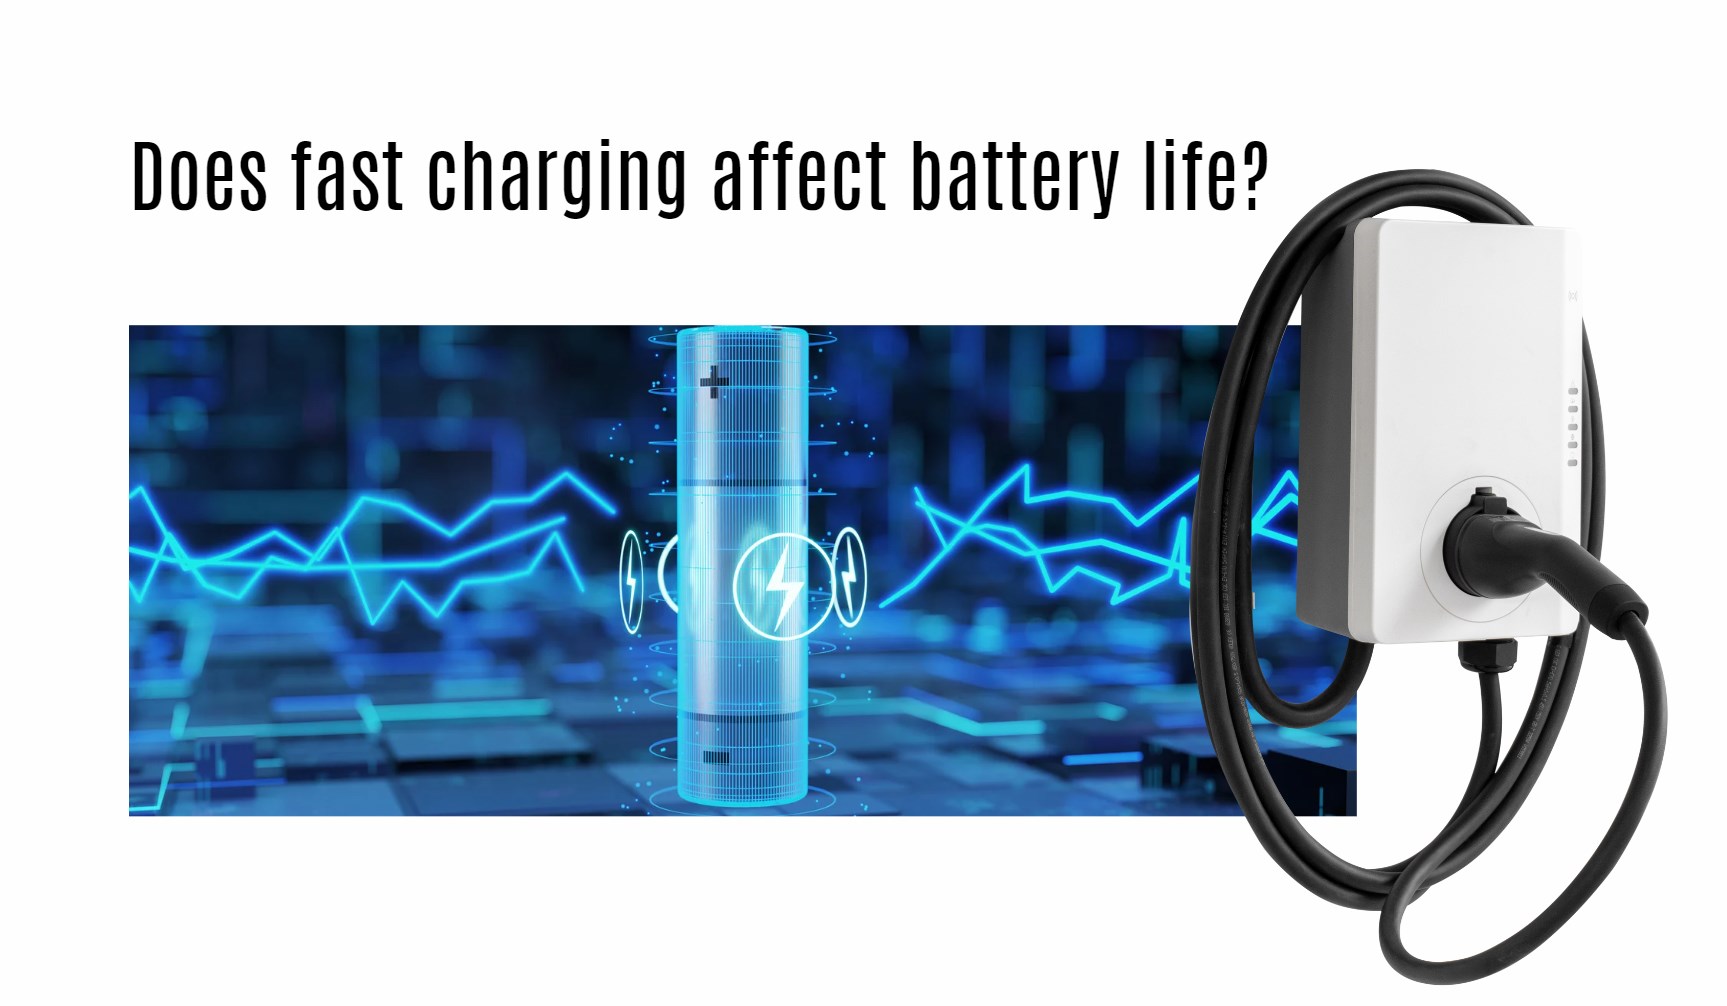 Does fast charging affect battery life?